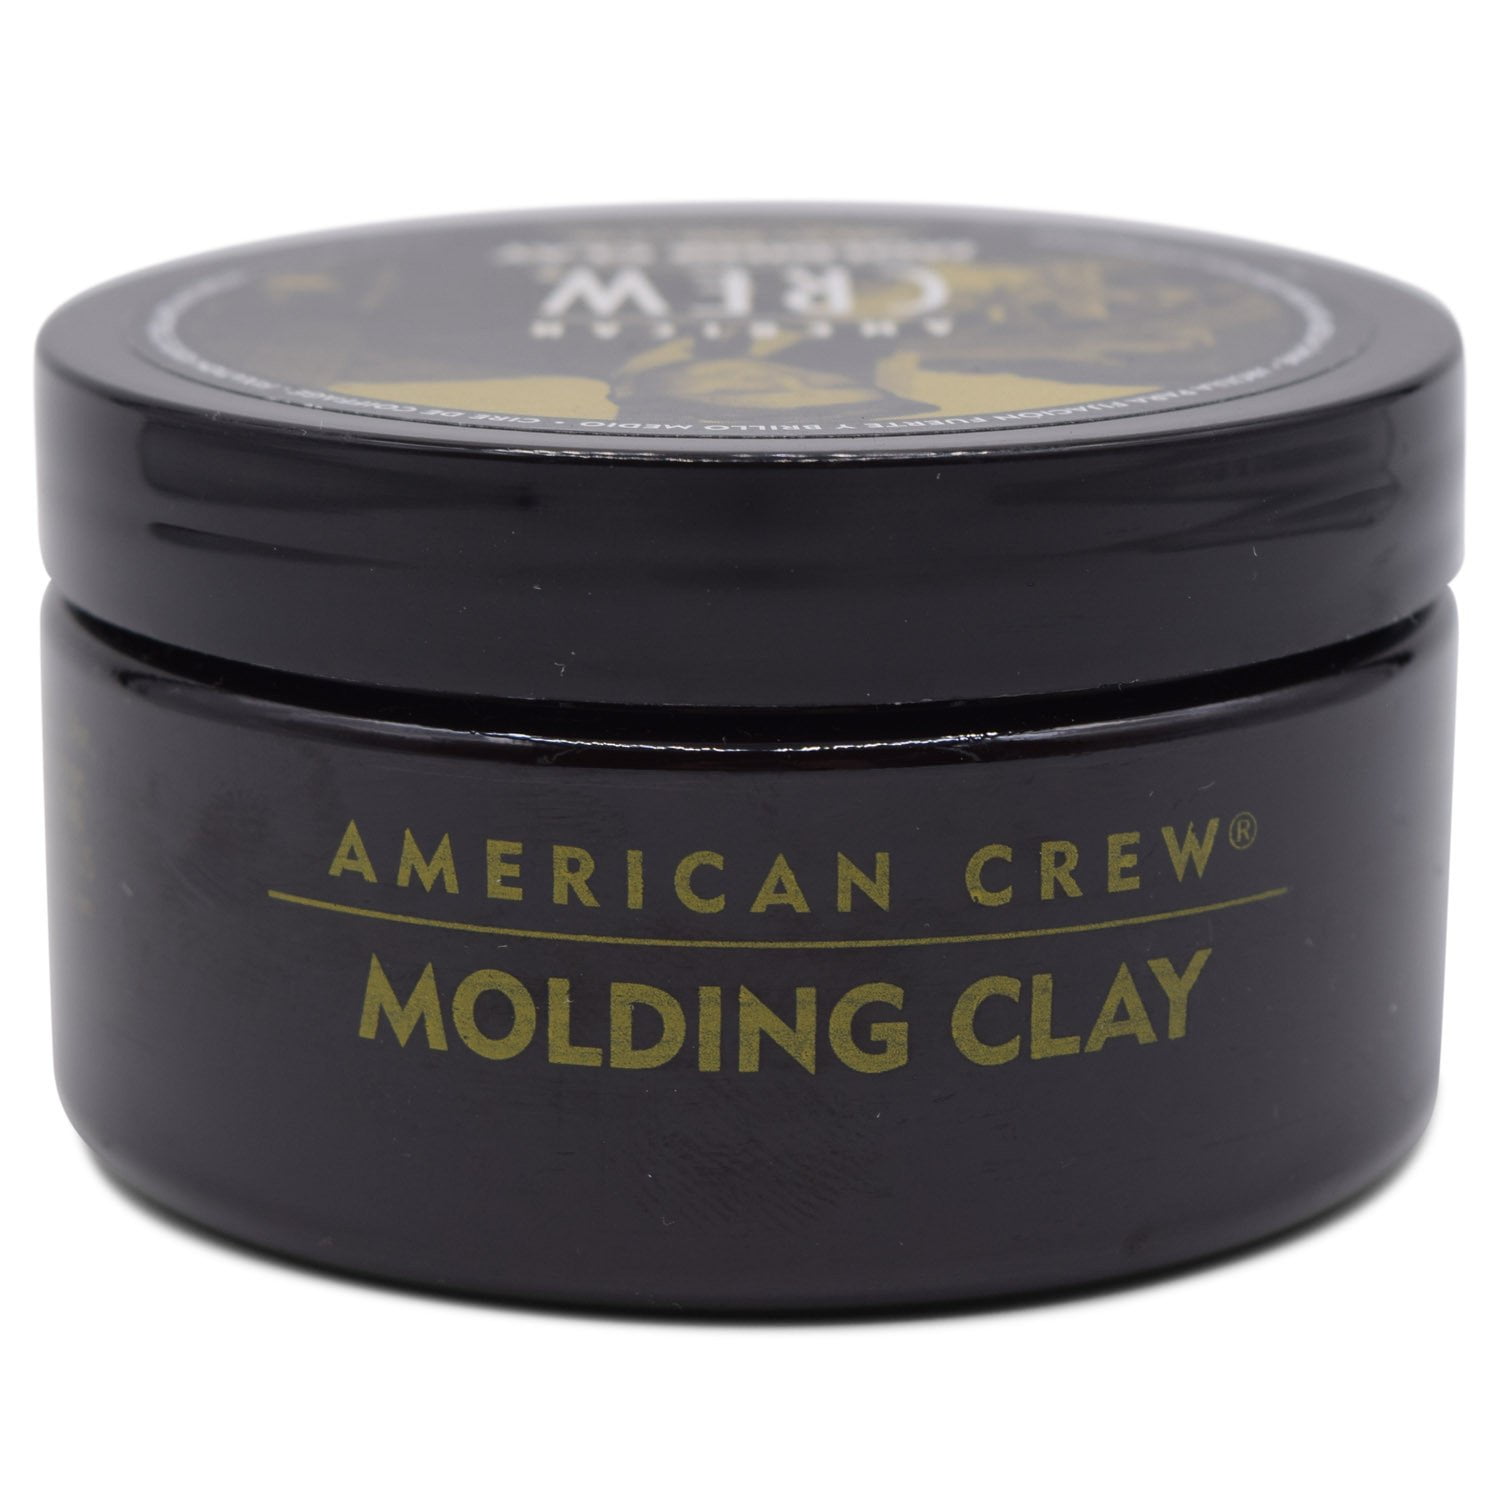 moulding clay price